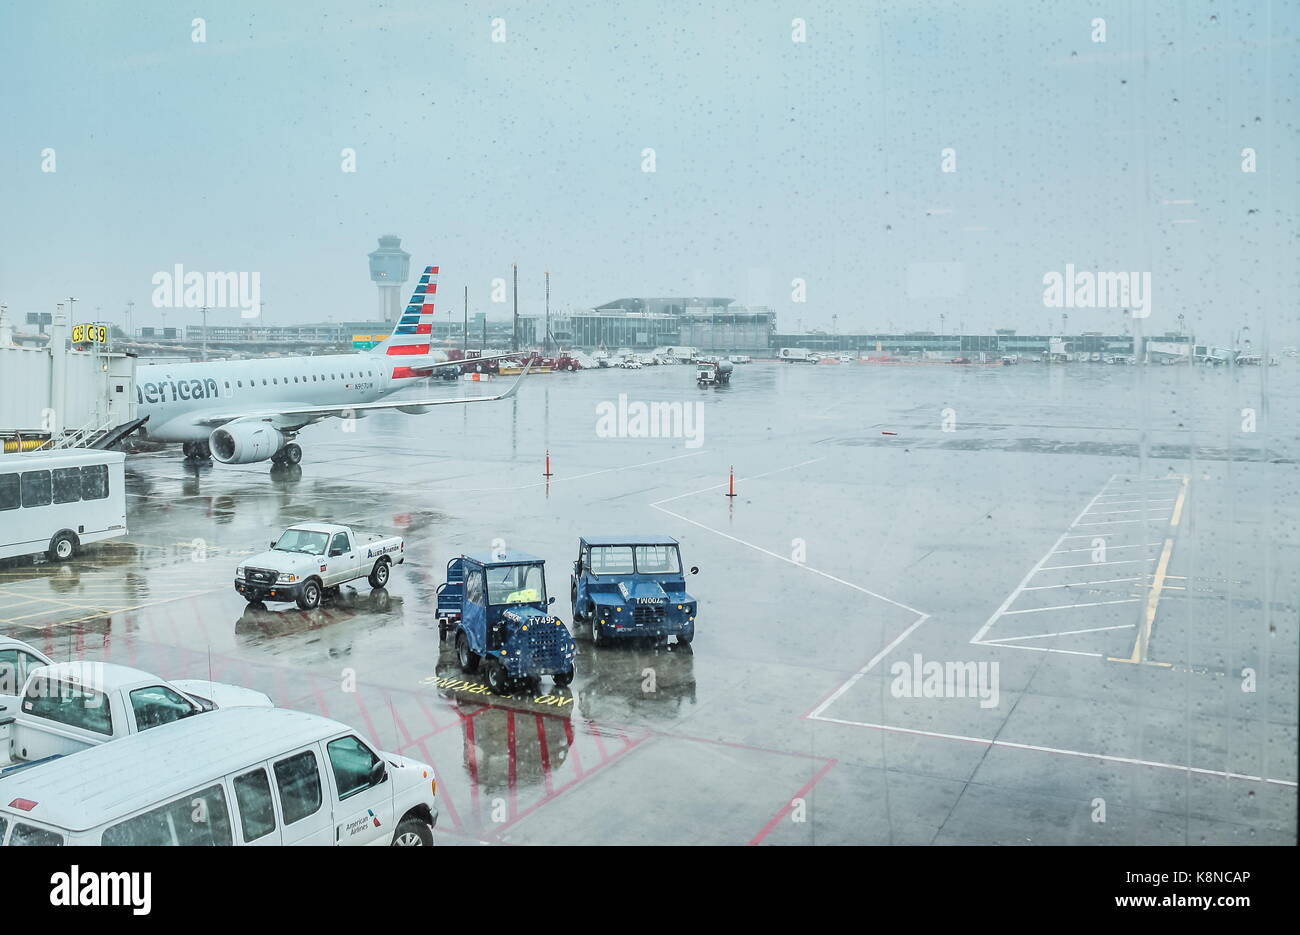 New York, USA - 30 September, 2016: View of LaGuardia Tarmac on a rainy day from inside the airport terminal. Stock Photo